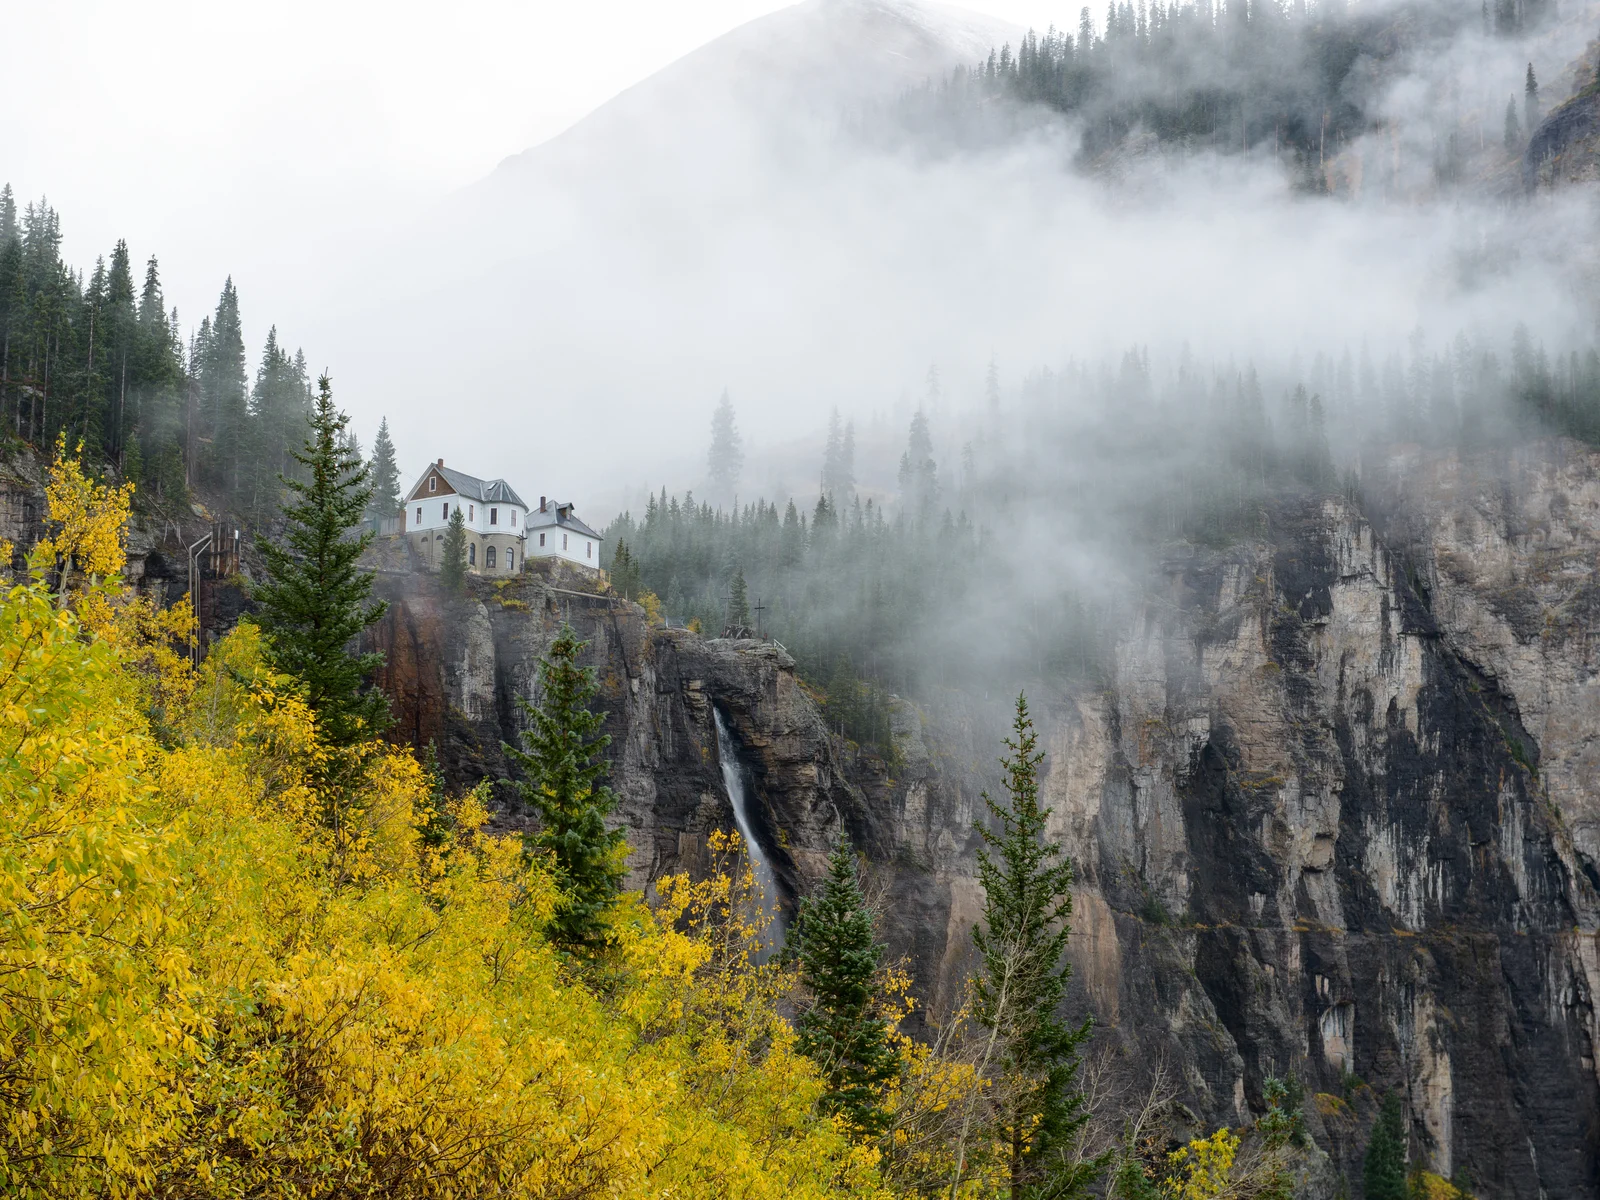 A lonely house on misty peaks of Bridal Veil Falls, as seen from Black Bear Pass trail in Deer Creek Canyon Park, one of the best hikes near Denver